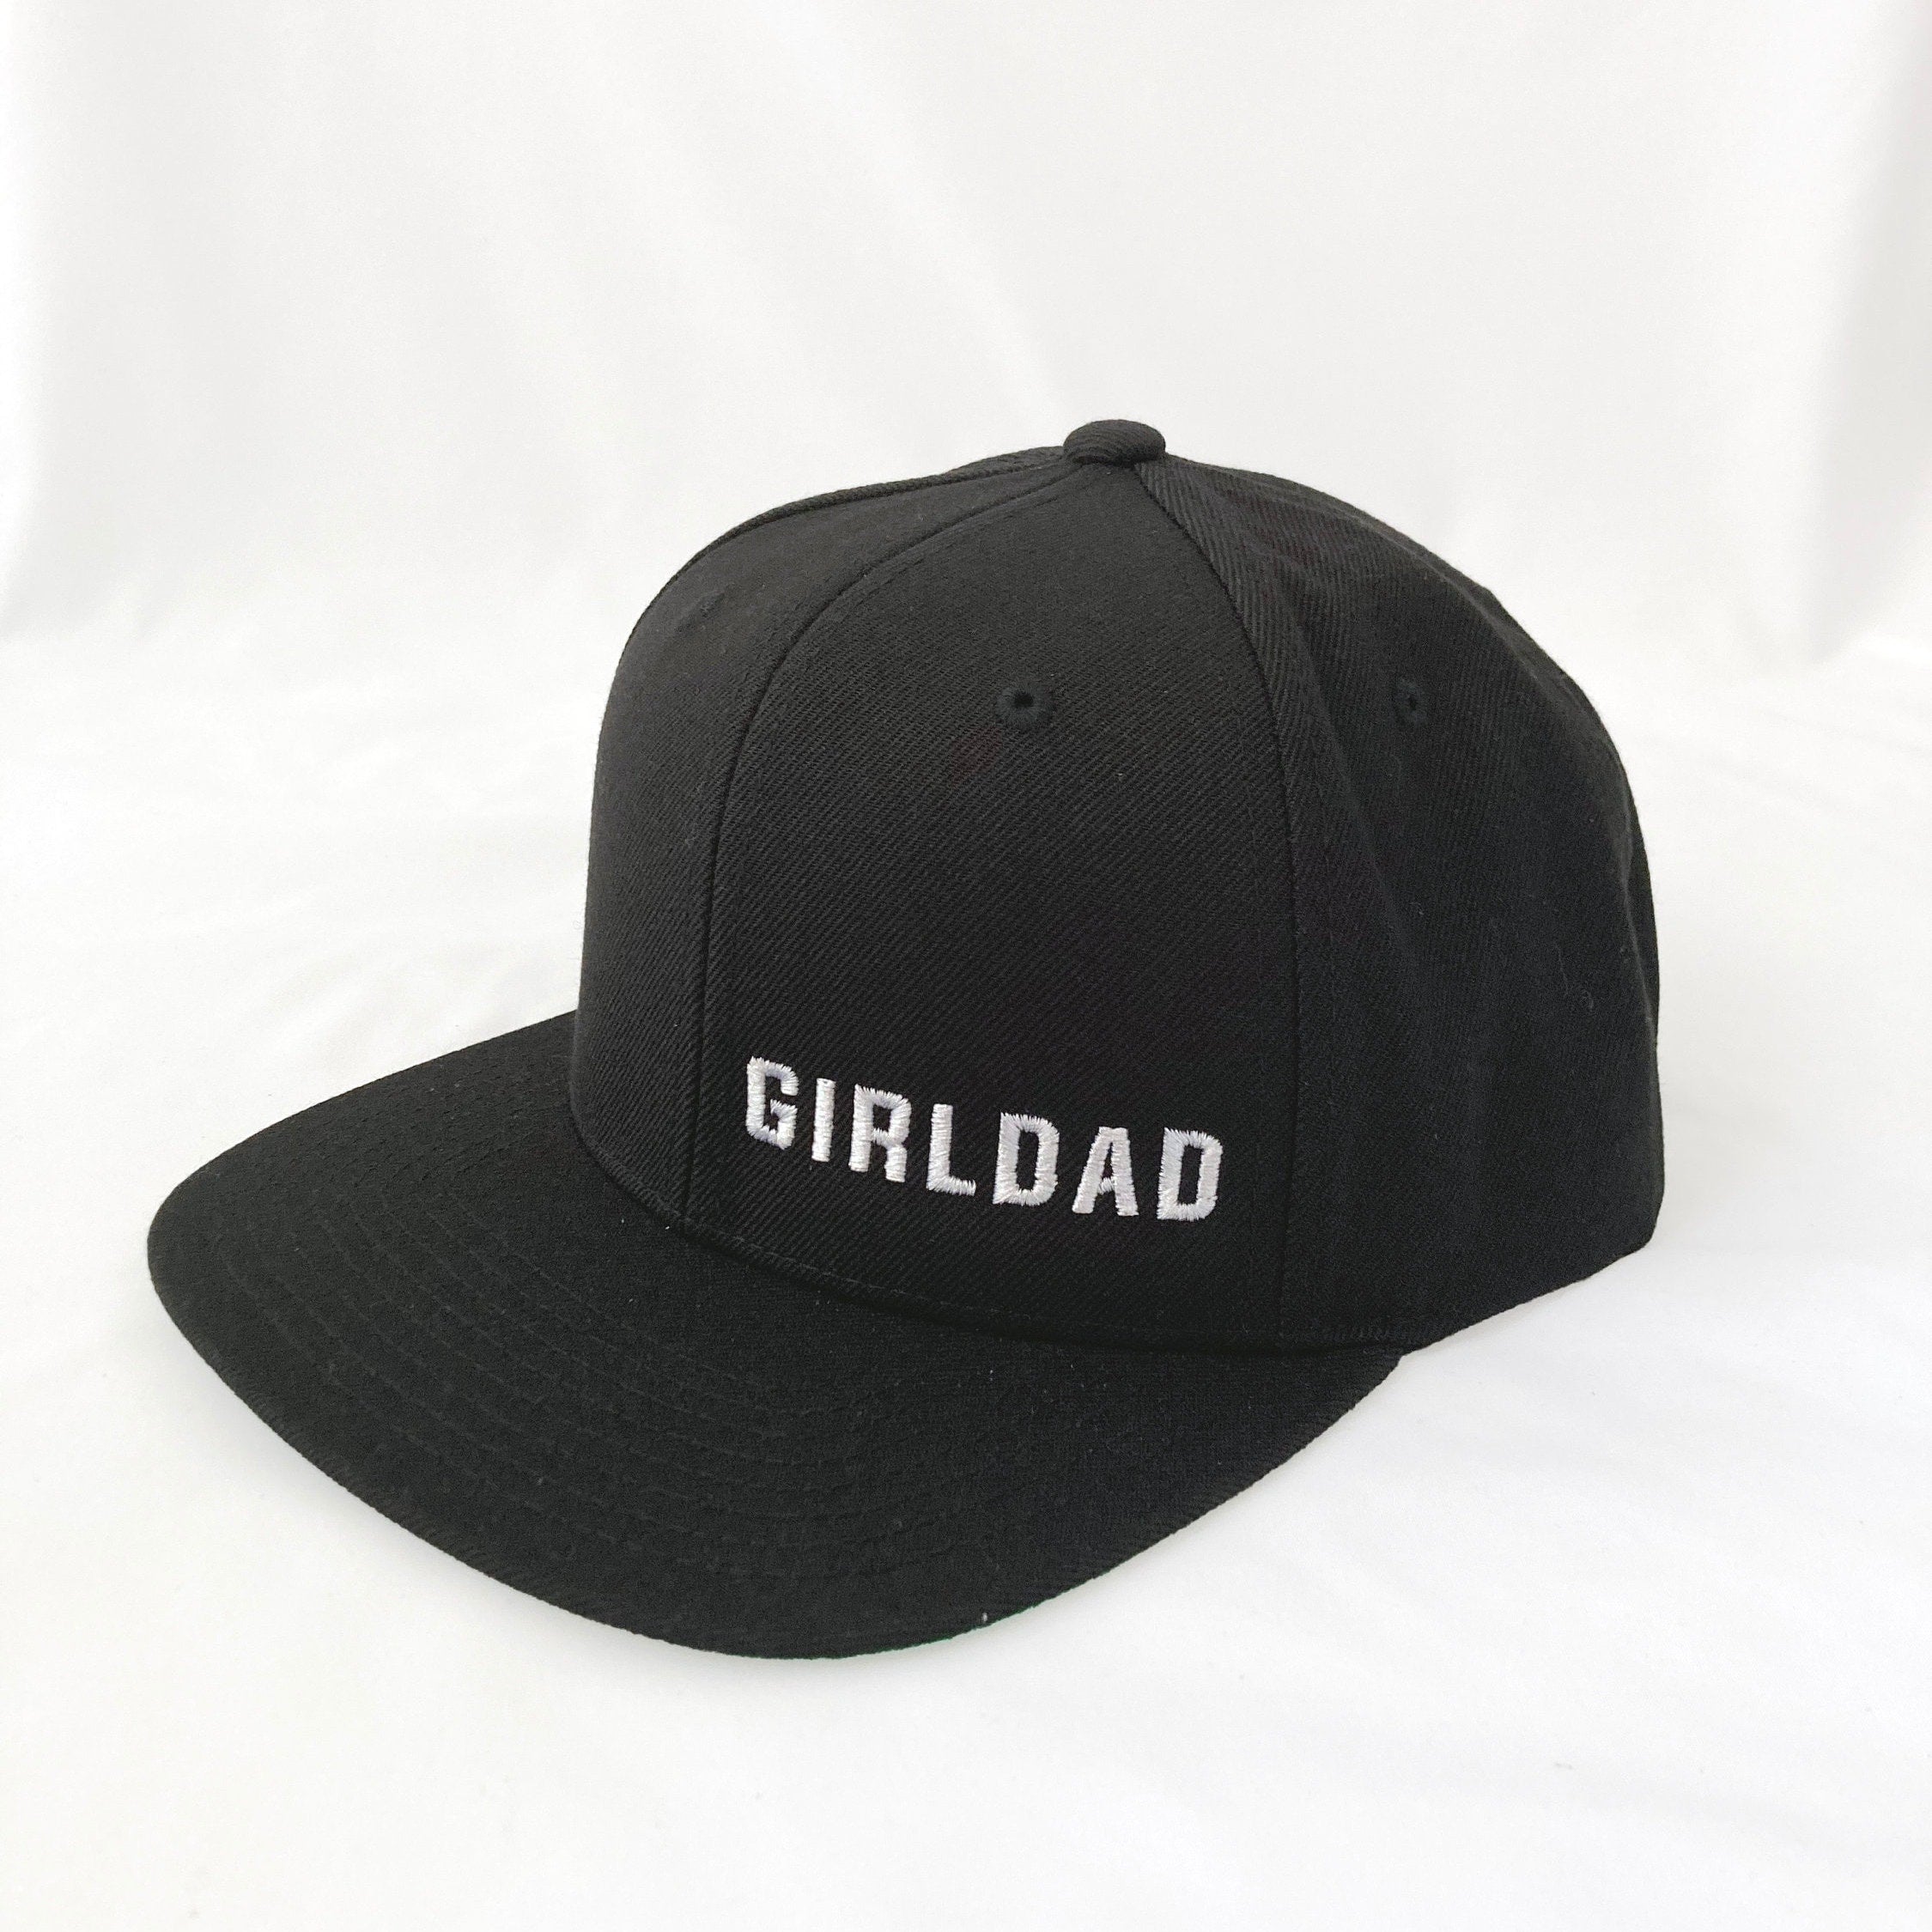 Girldad® Black with White Embroidery Hat